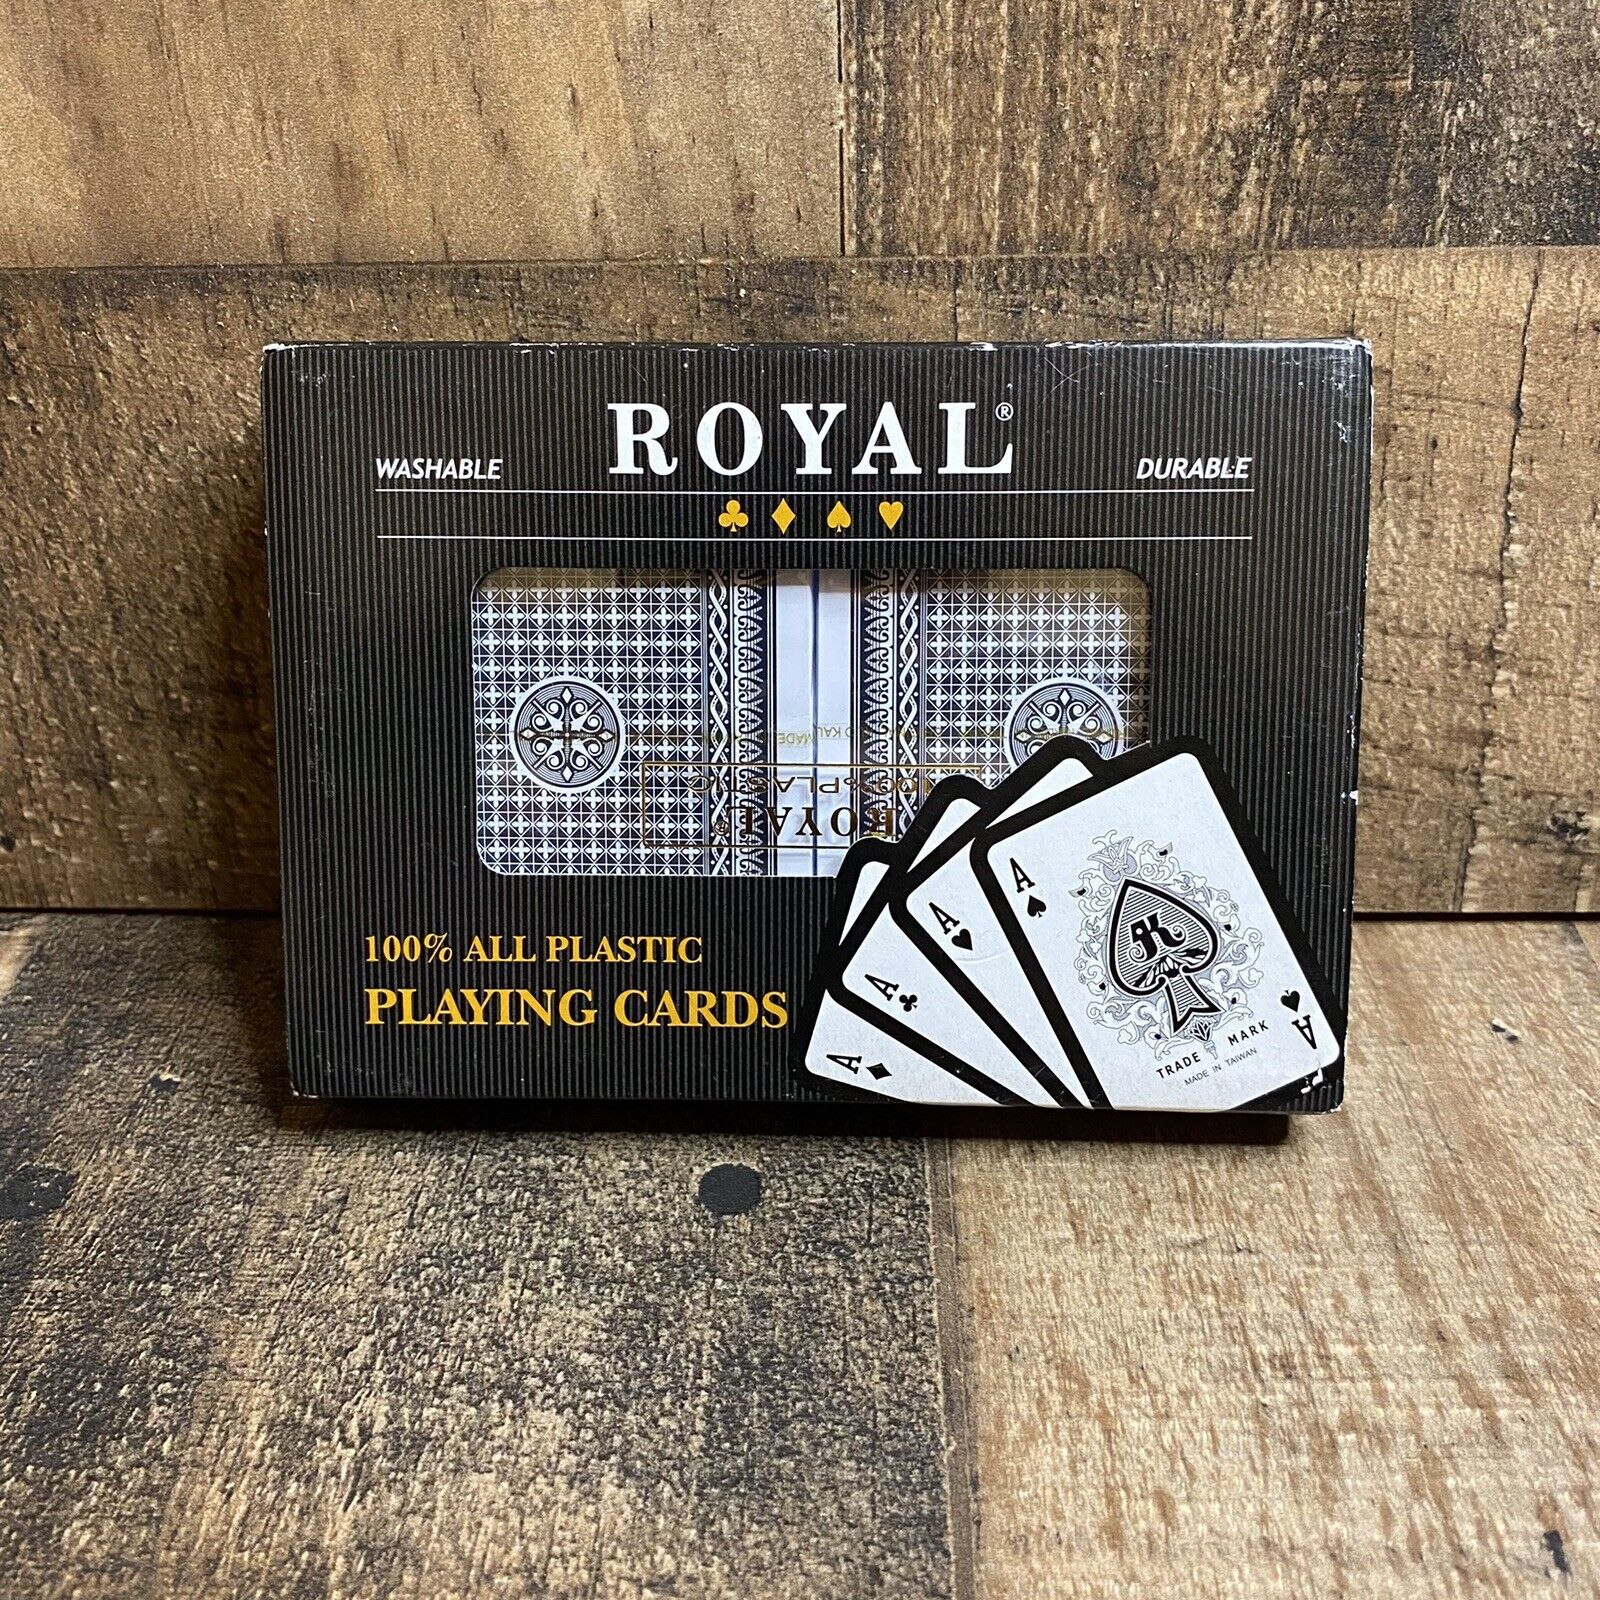 Royal Playing cards 2-Decks Poker Size- 100% Plastic Playing Cards